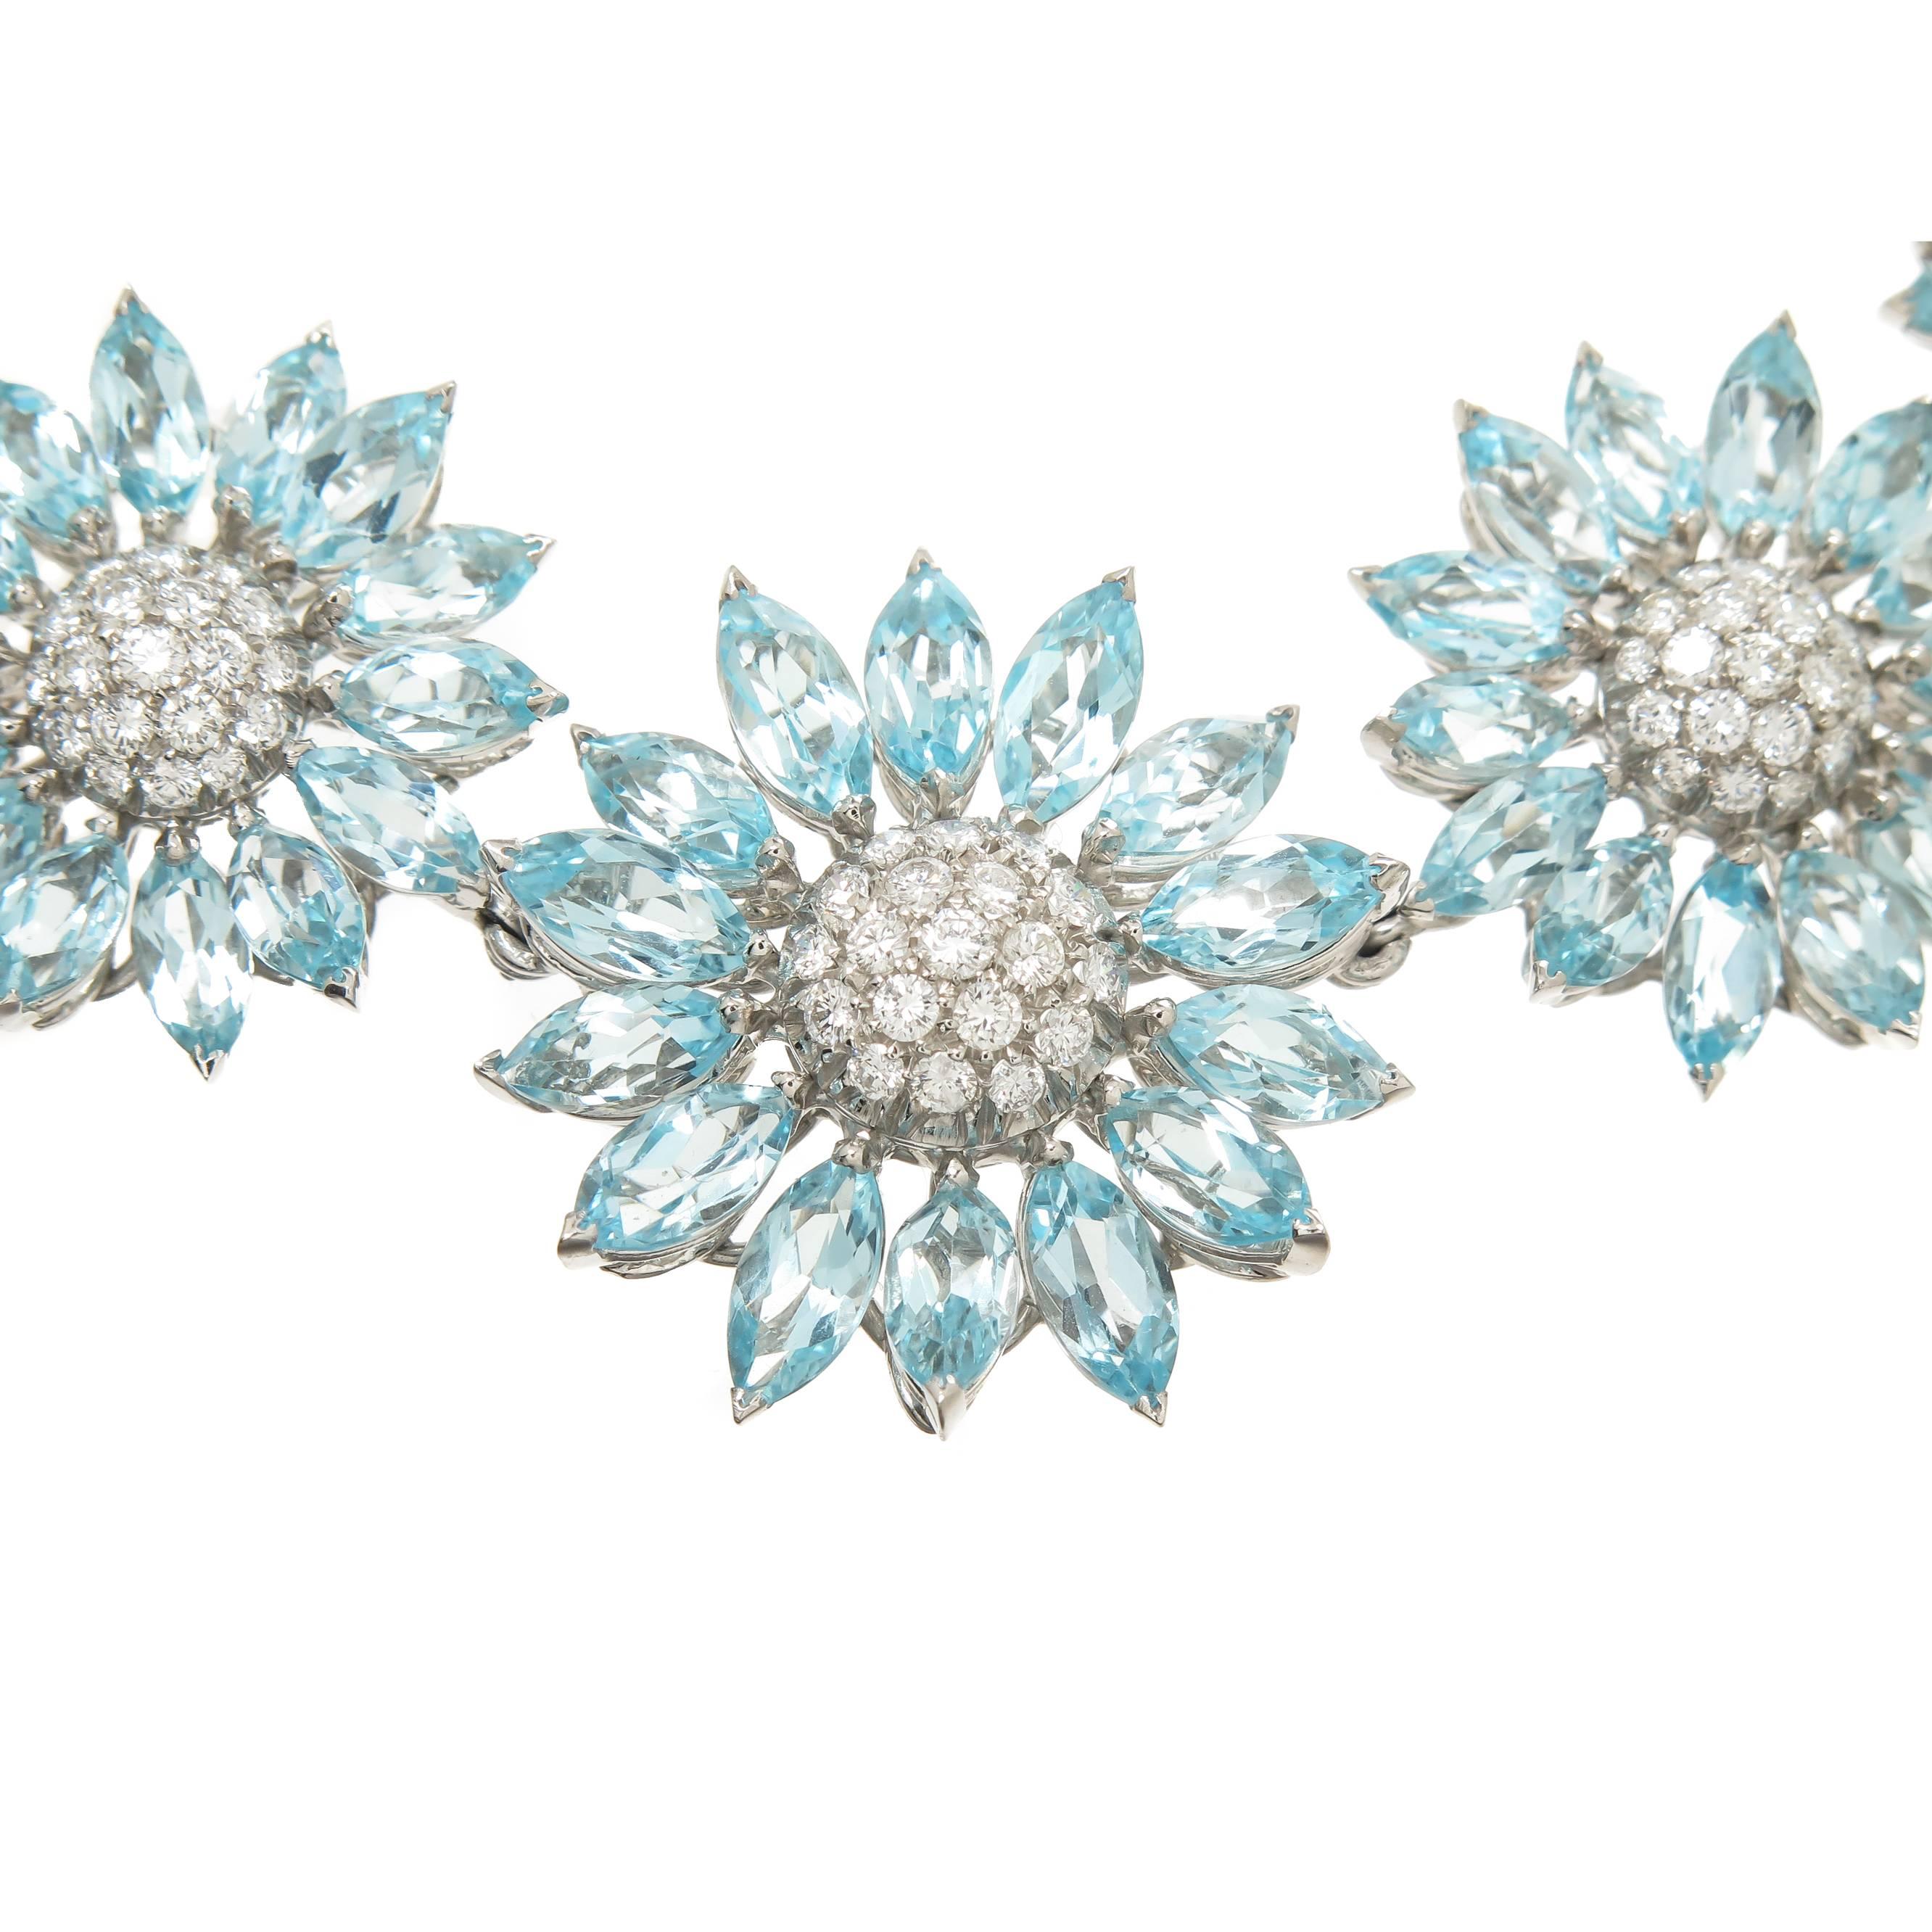 Circa 1997 Asprey 18K White Gold Diamond and Blue topaz necklace and Earring suite worn by Actress Claire Danes to the 1997 Academy Awards. The Daisy Heritage collection Necklace is made up of 24 individual Daisy Flower form sections containing Fine